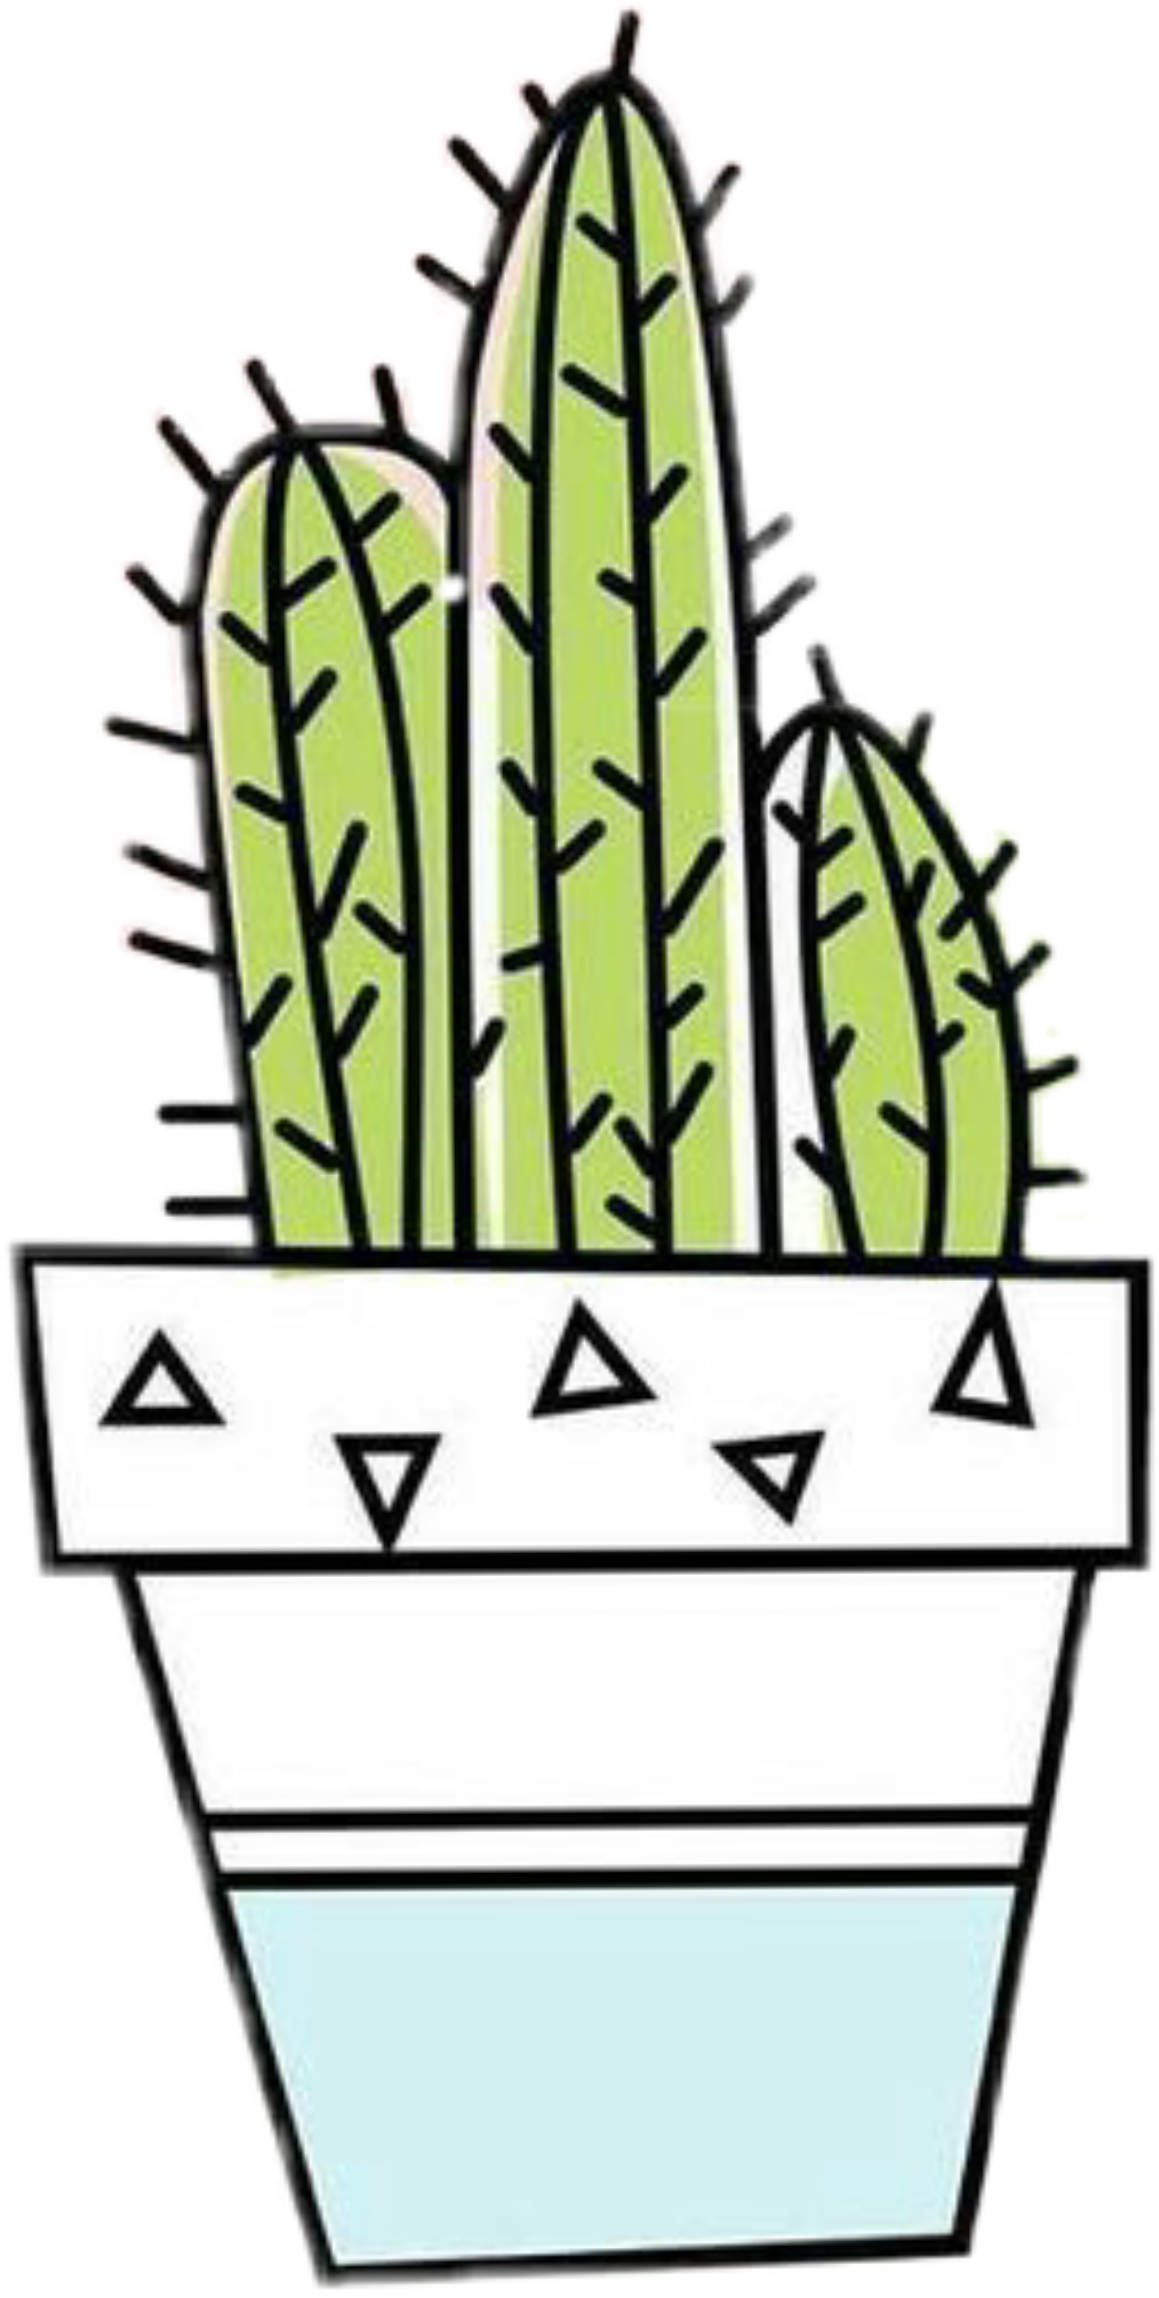 Download Cactus Doodle Drawing Tumblr Sticker Annie Png Fondos De Pantalla Para Chicas Png Image With No Background Pngkey Com